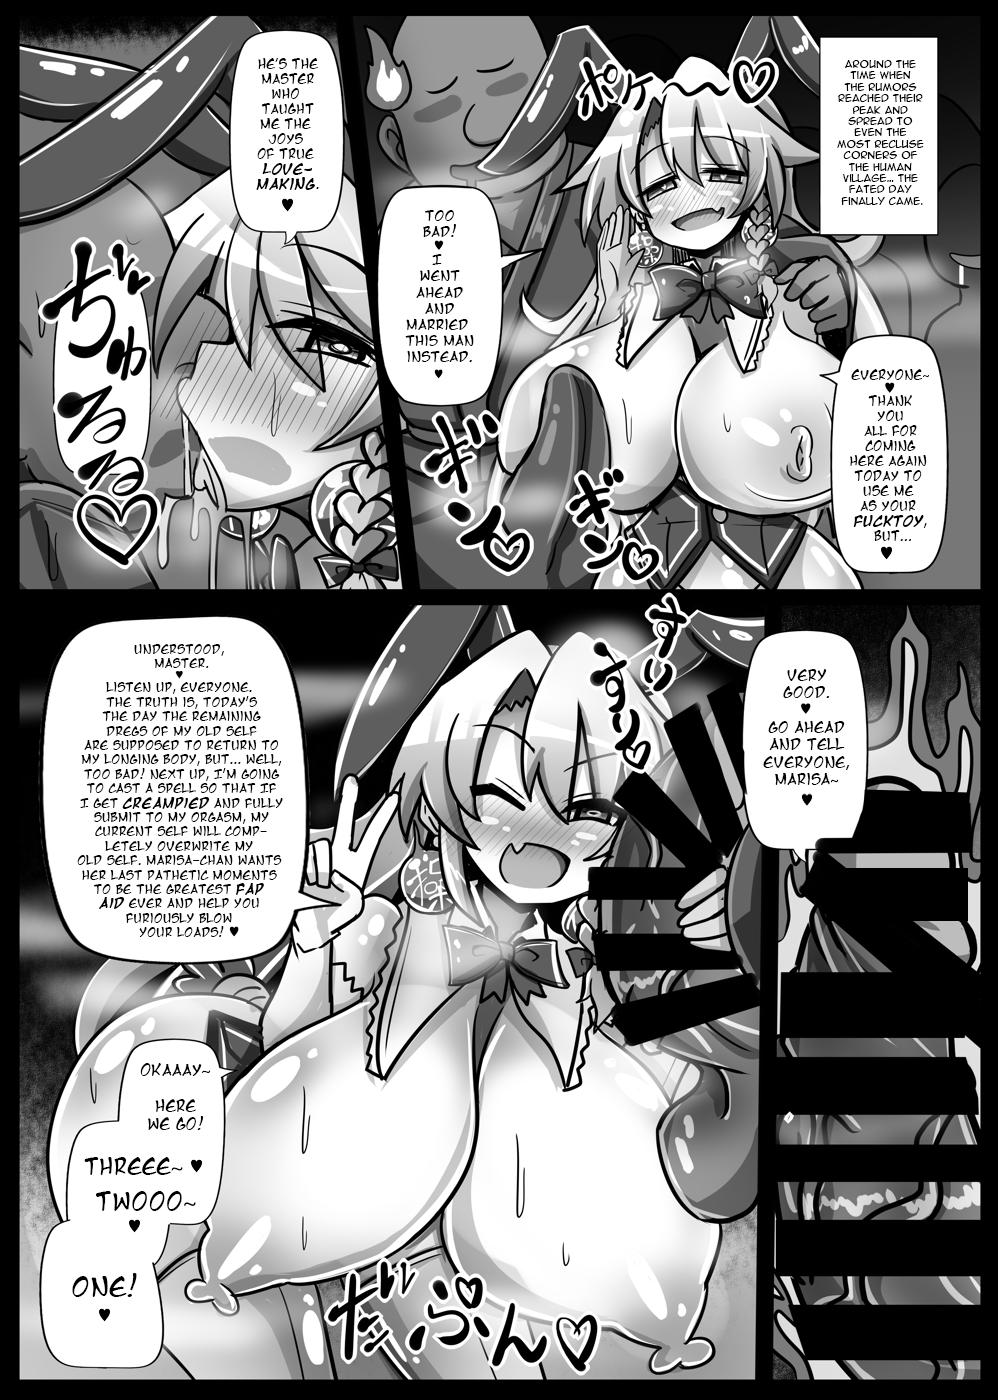 Gorgeous Paradise of Fake Lovers The Brainwashing of Young Maidens Story 2 - Touhou project Fist - Page 9